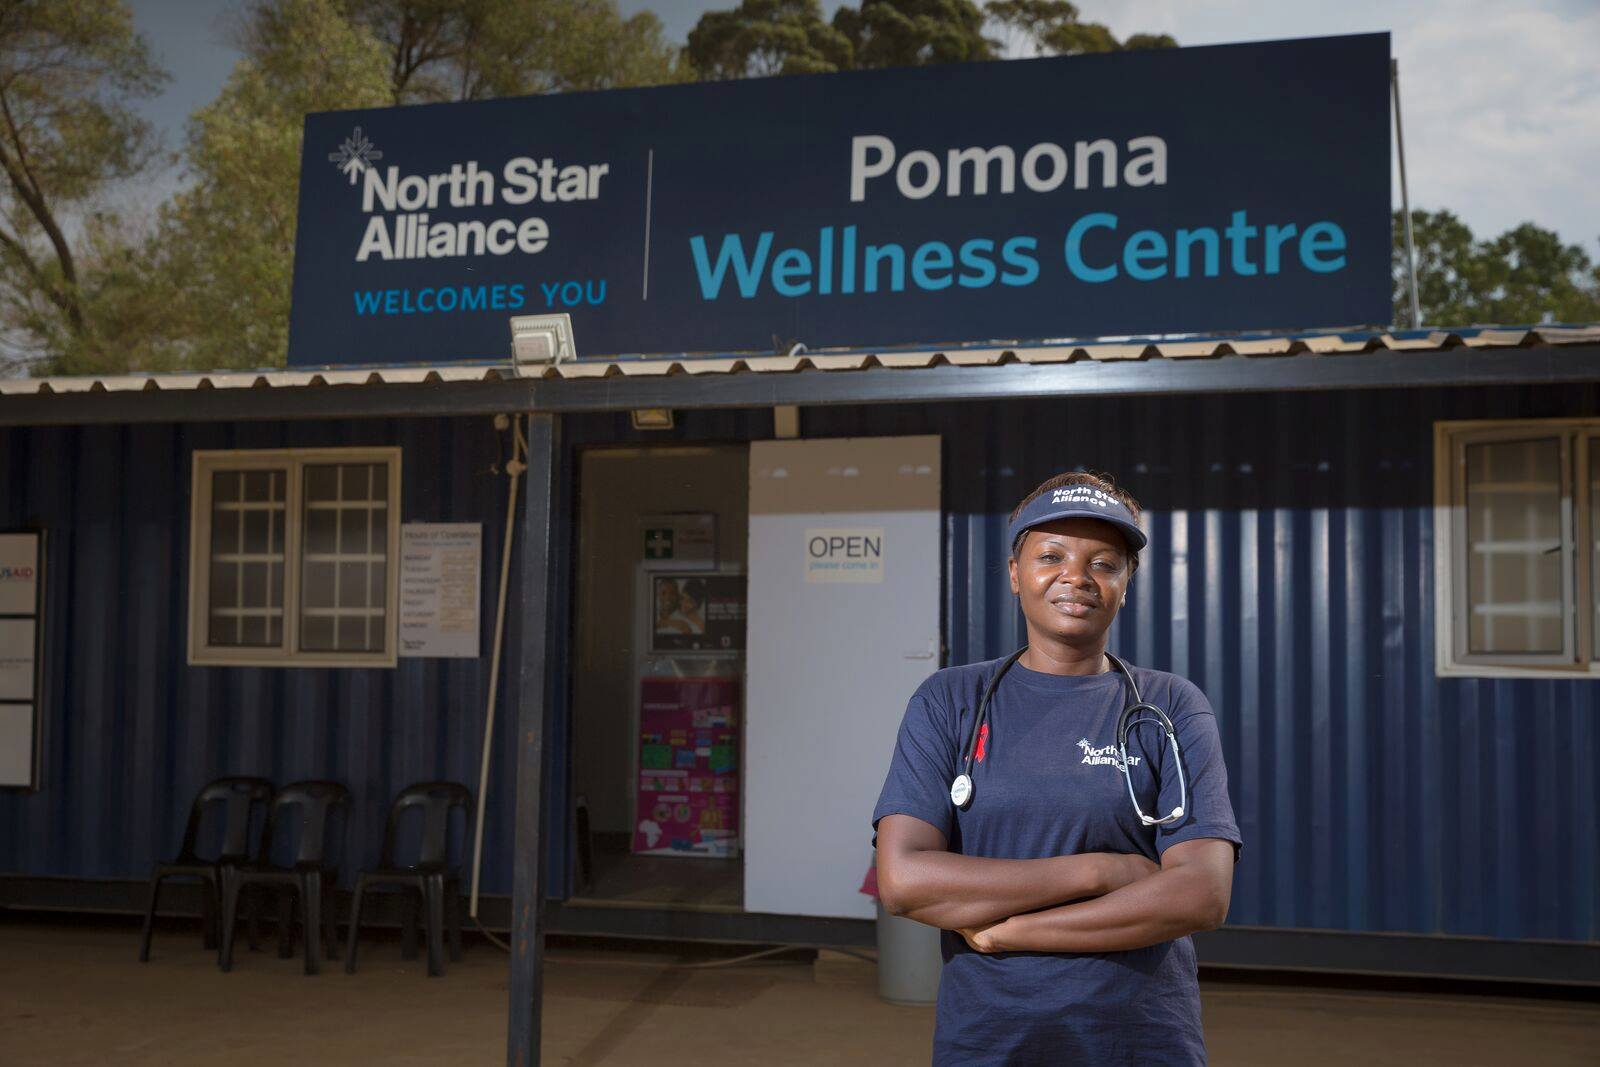 A woman with a stethoscope stands in front of a blue box clinic that says "North Star Alliance welcomes you" and "Pomona Wellness Centre"